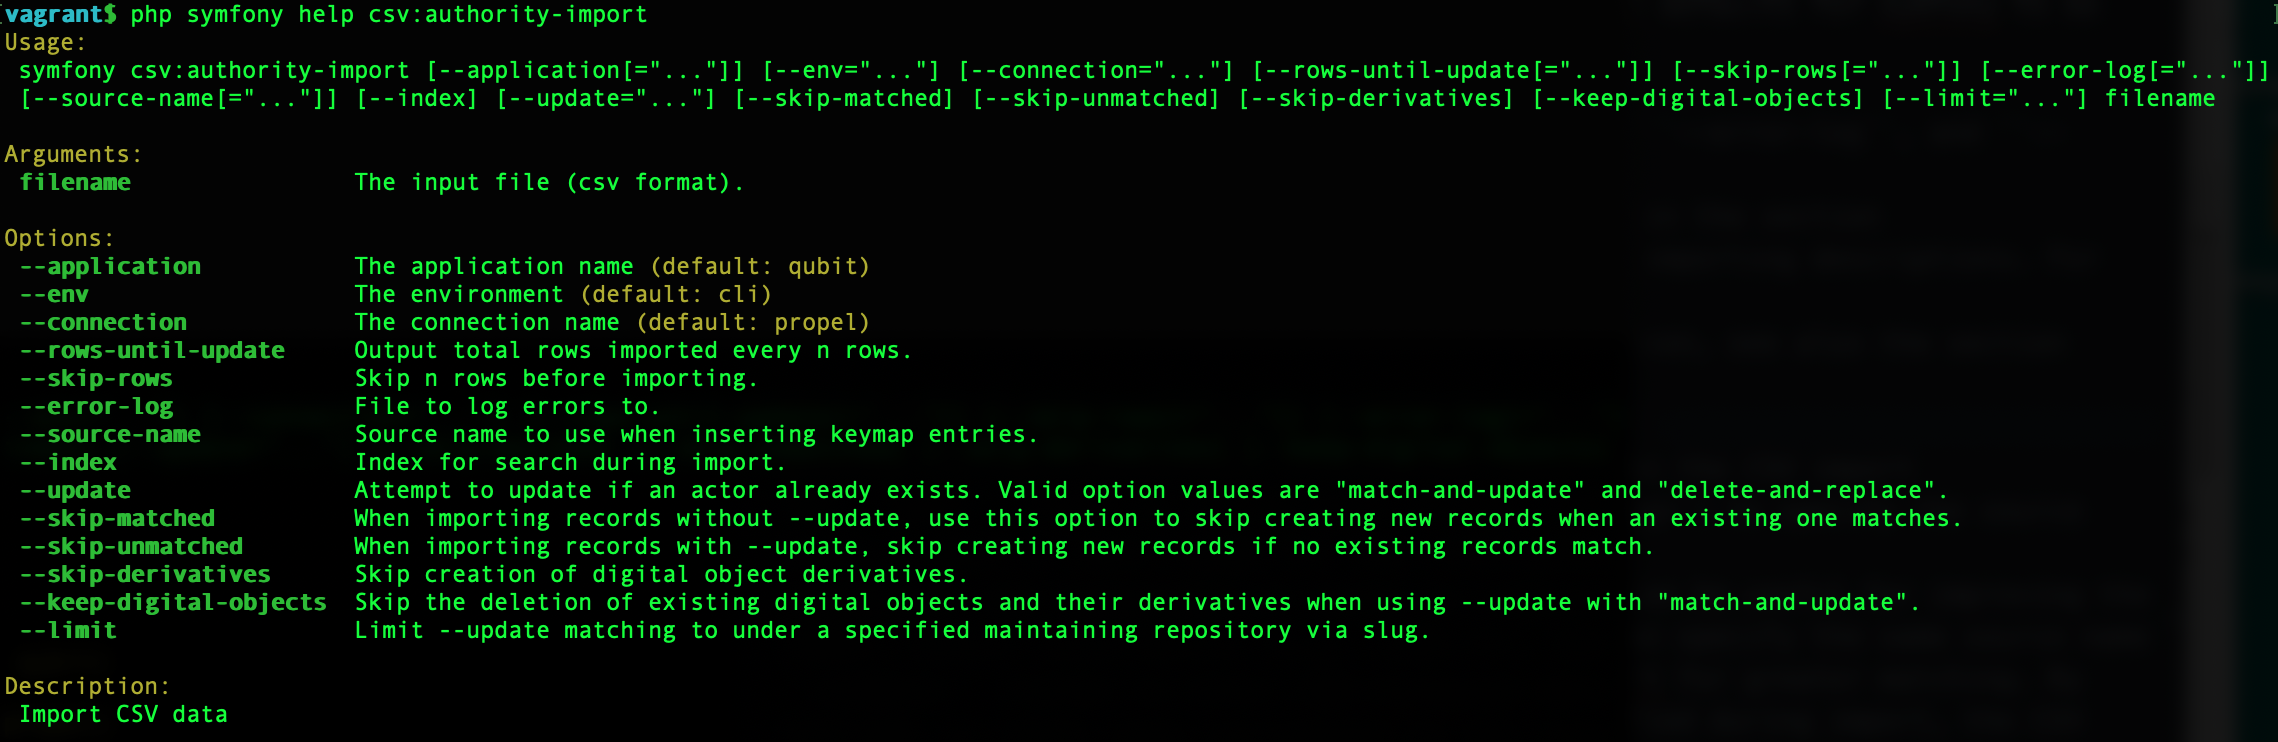 An image of the command-line options for authority record CSV imports